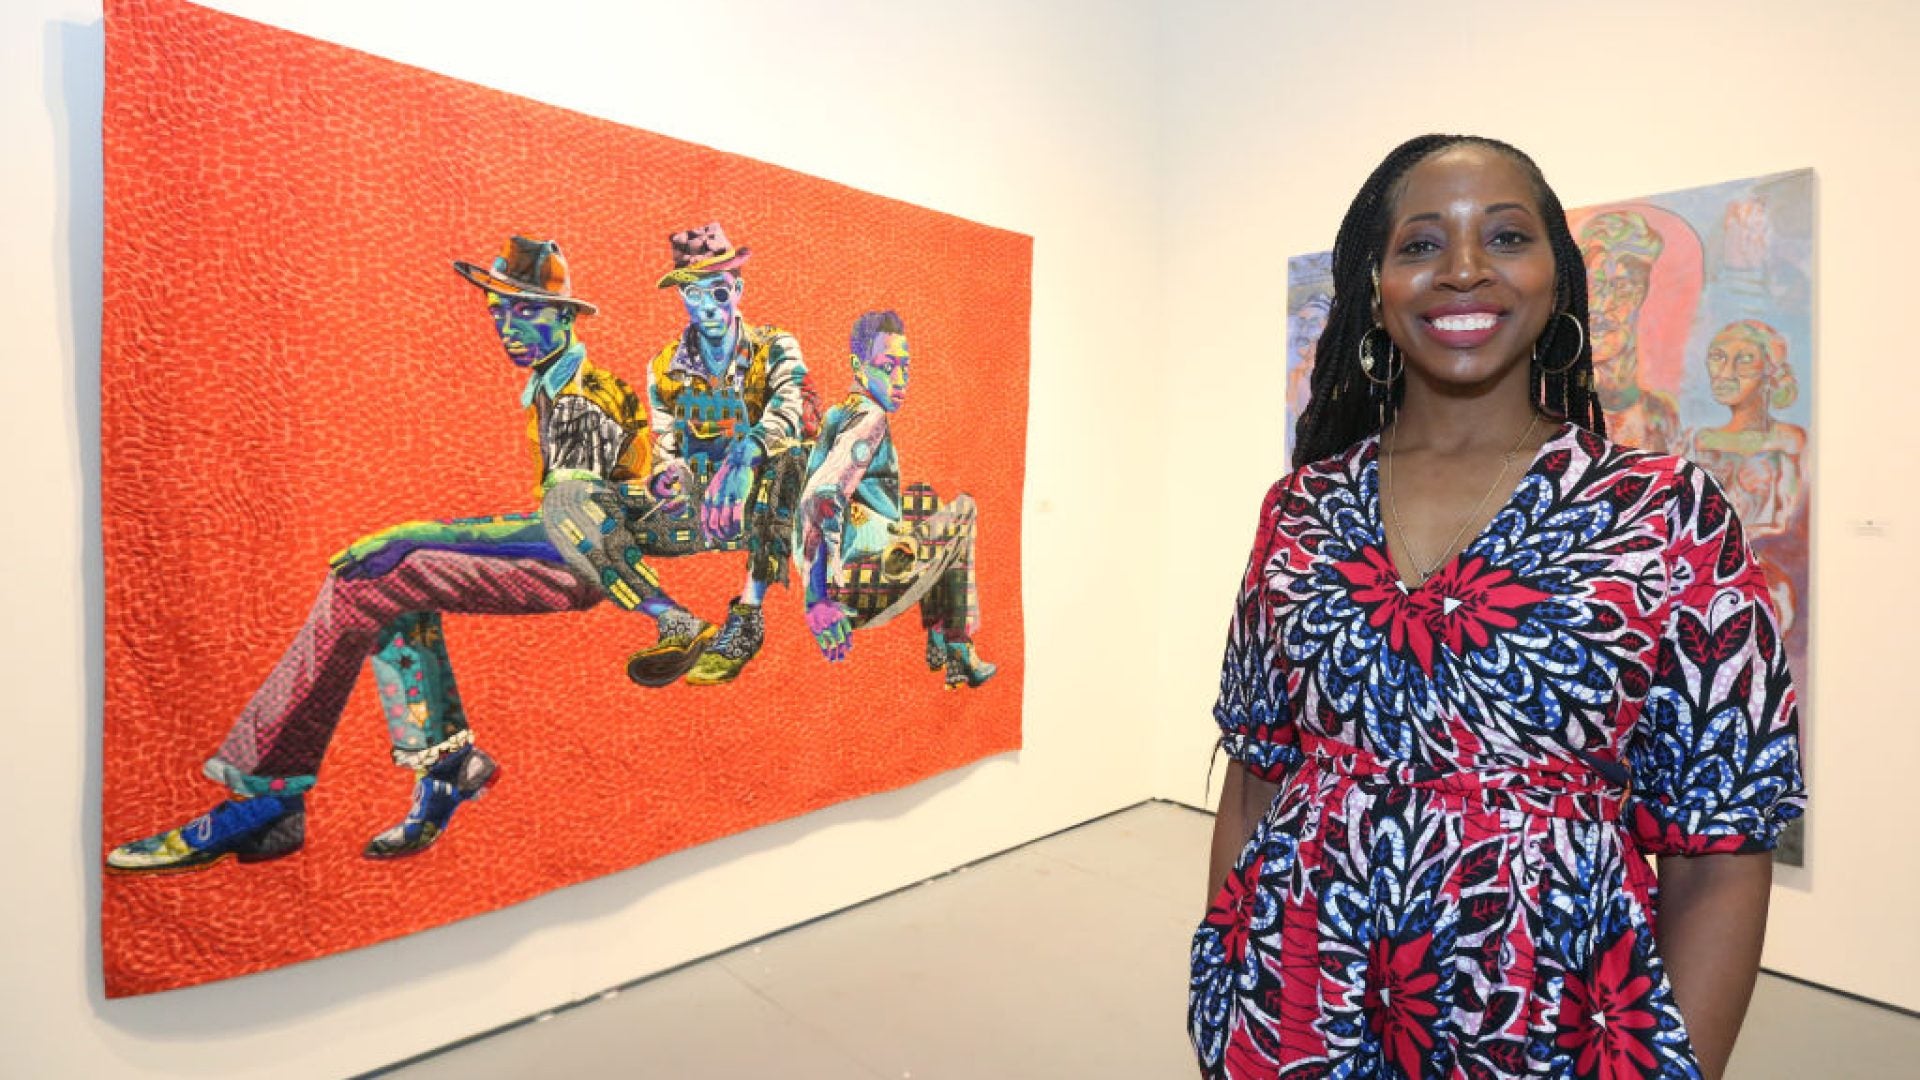 7 Exhibits For Black Women To Visit This Year